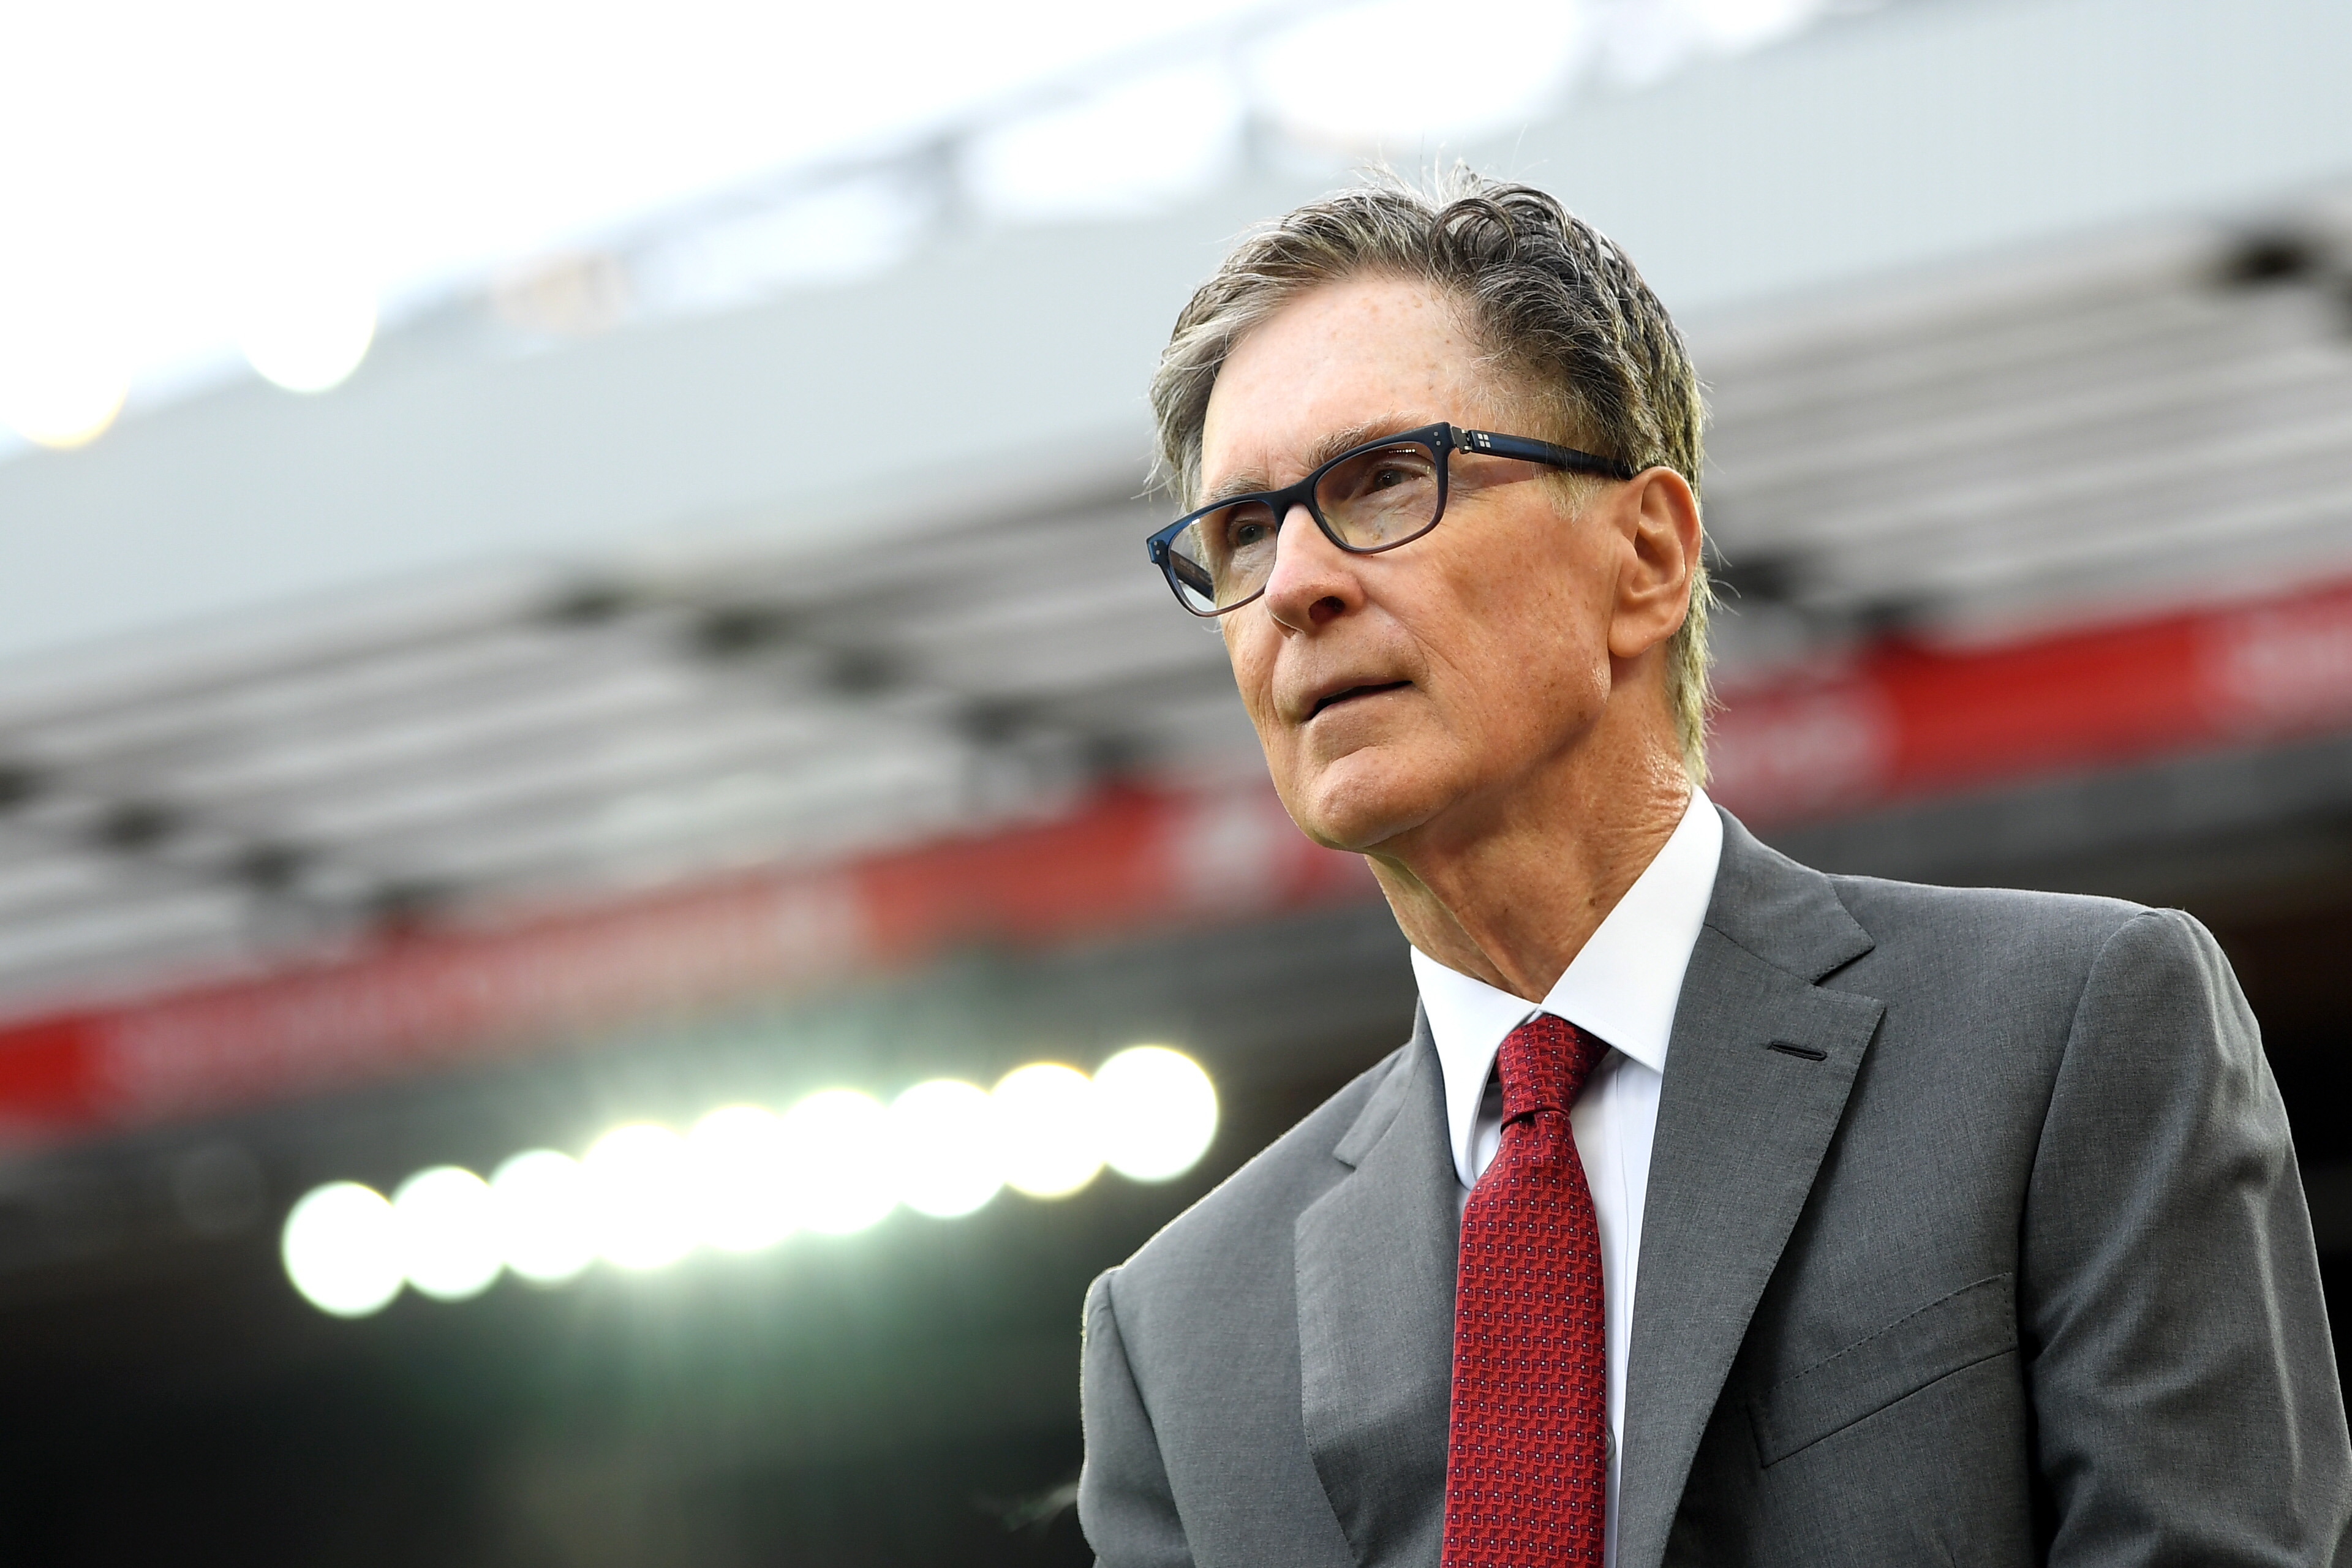 Liverpool now learn of major eight-figure financial boost; FSG will be pleased